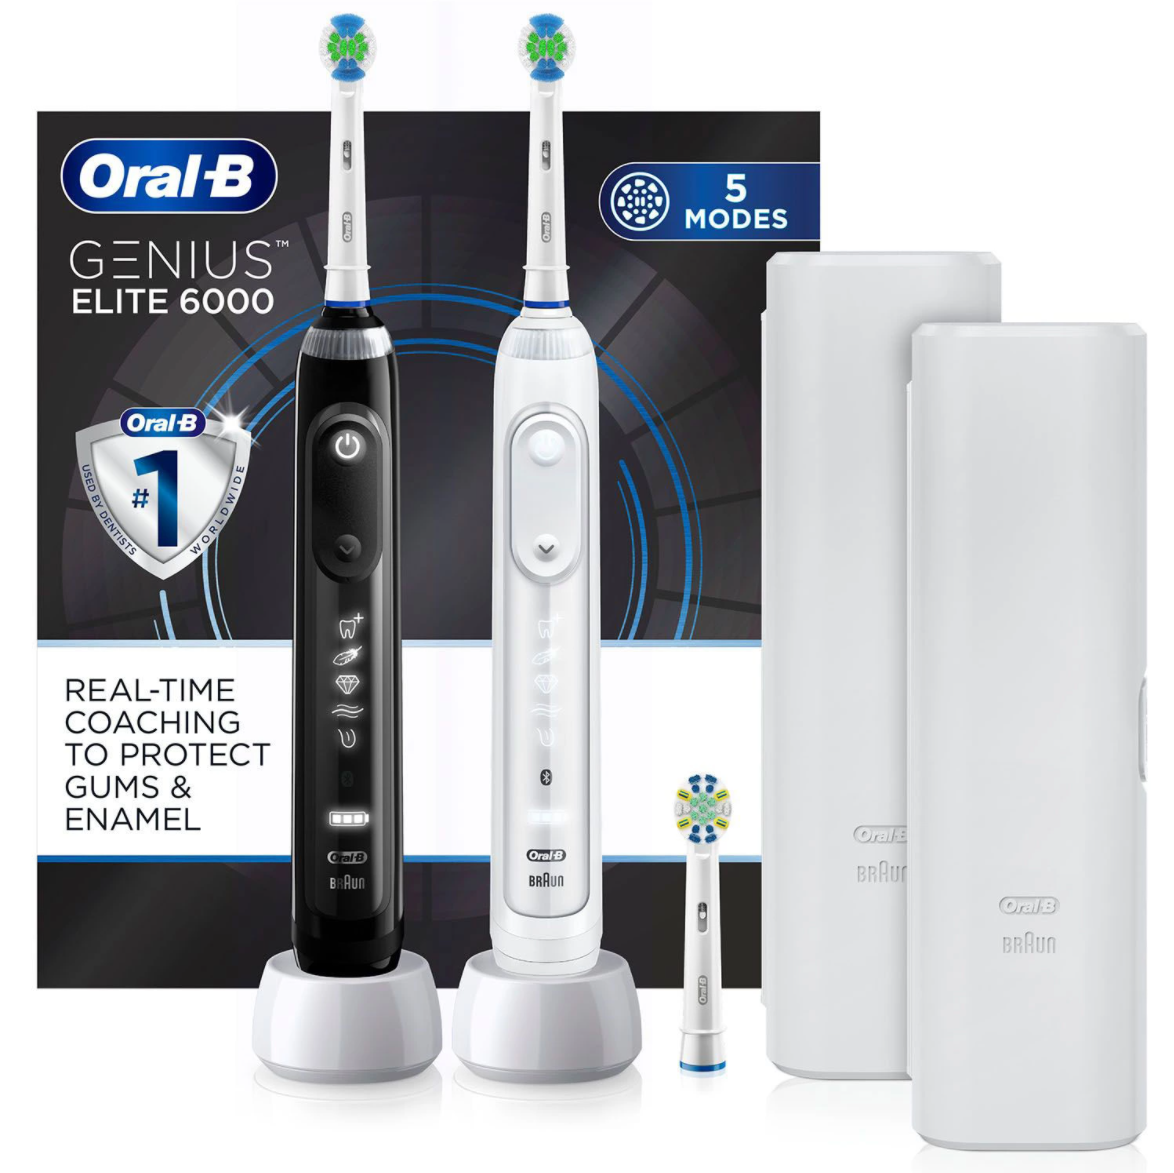 Oral-B Genius Elite 6000 Rechargeable Electric Toothbrush, White & Black, (2 pk.) $79.98 at Sam's Club